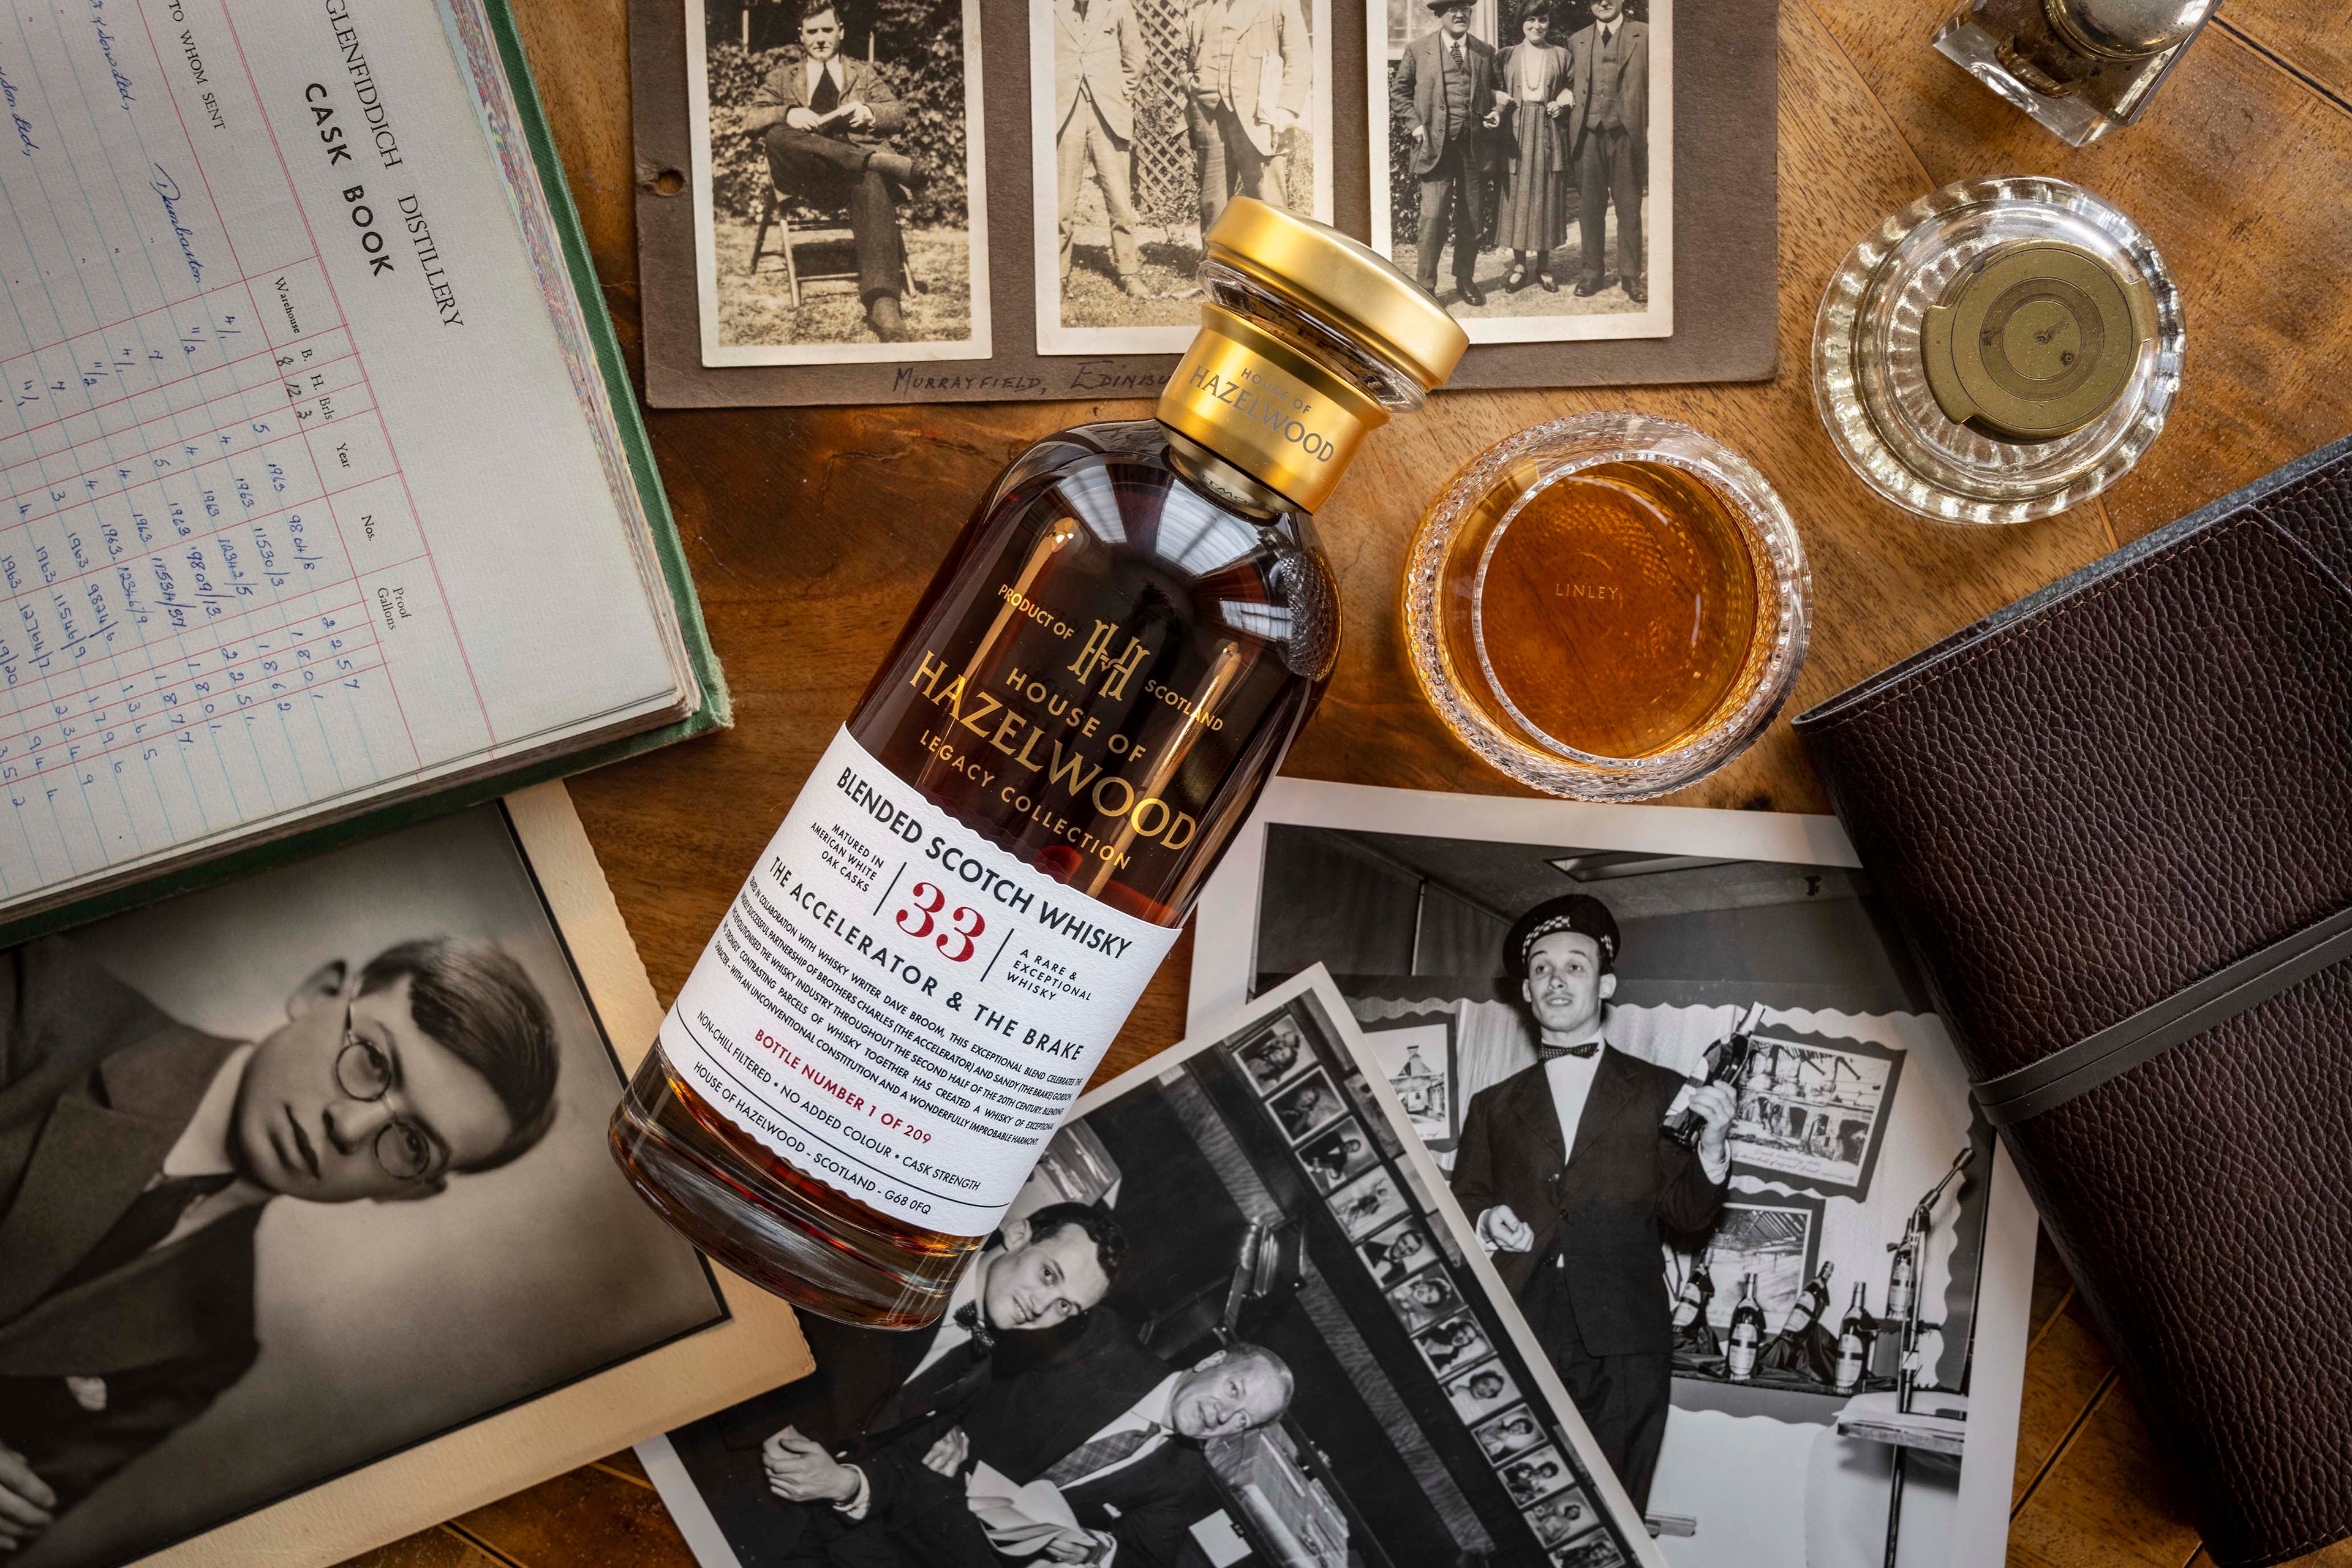 A bottle of The Accelerator & The Brake Whisky lying on a desk with a pour of the whisky and images of brothers Charles & Sandy Gordon who inspired the blend.